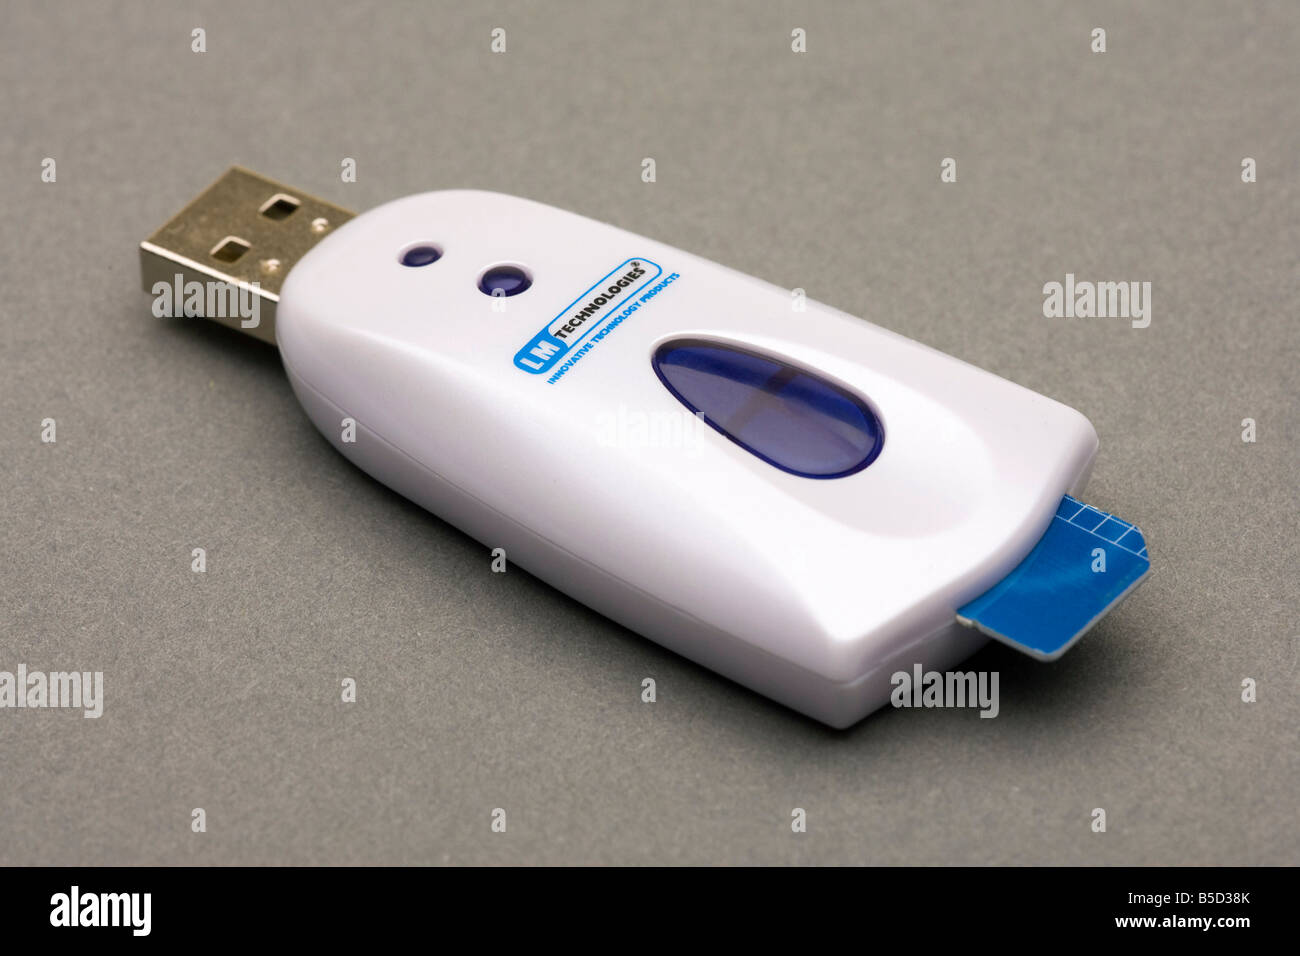 SIM card and USB reader device to save copy from / write to card Stock Photo